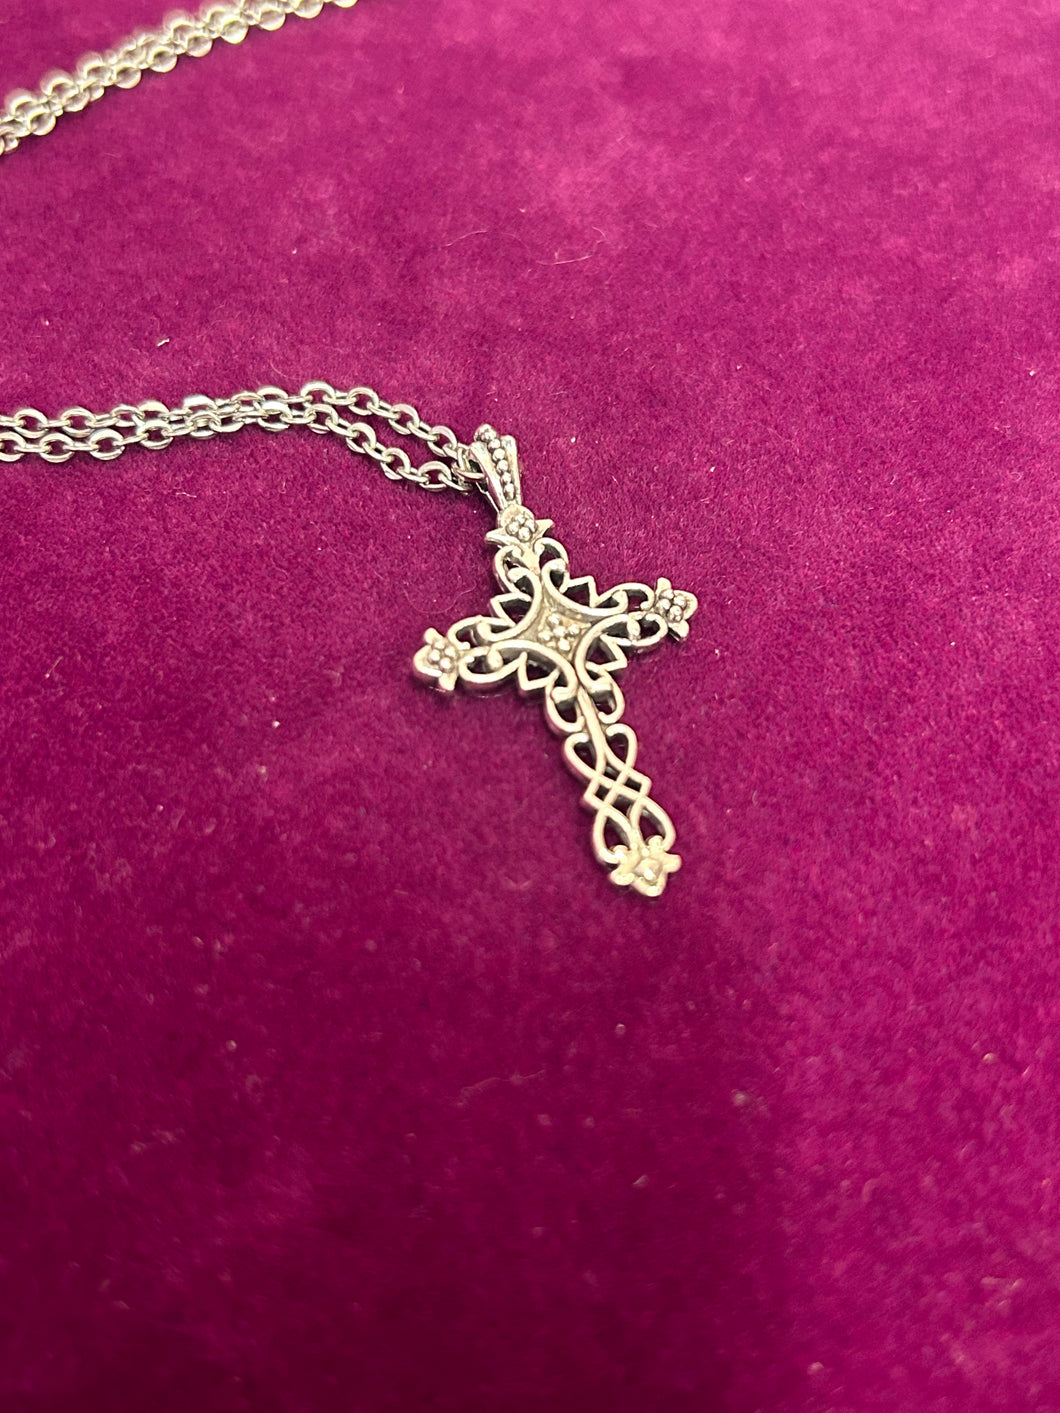 CROSS SILVER NECKLACE